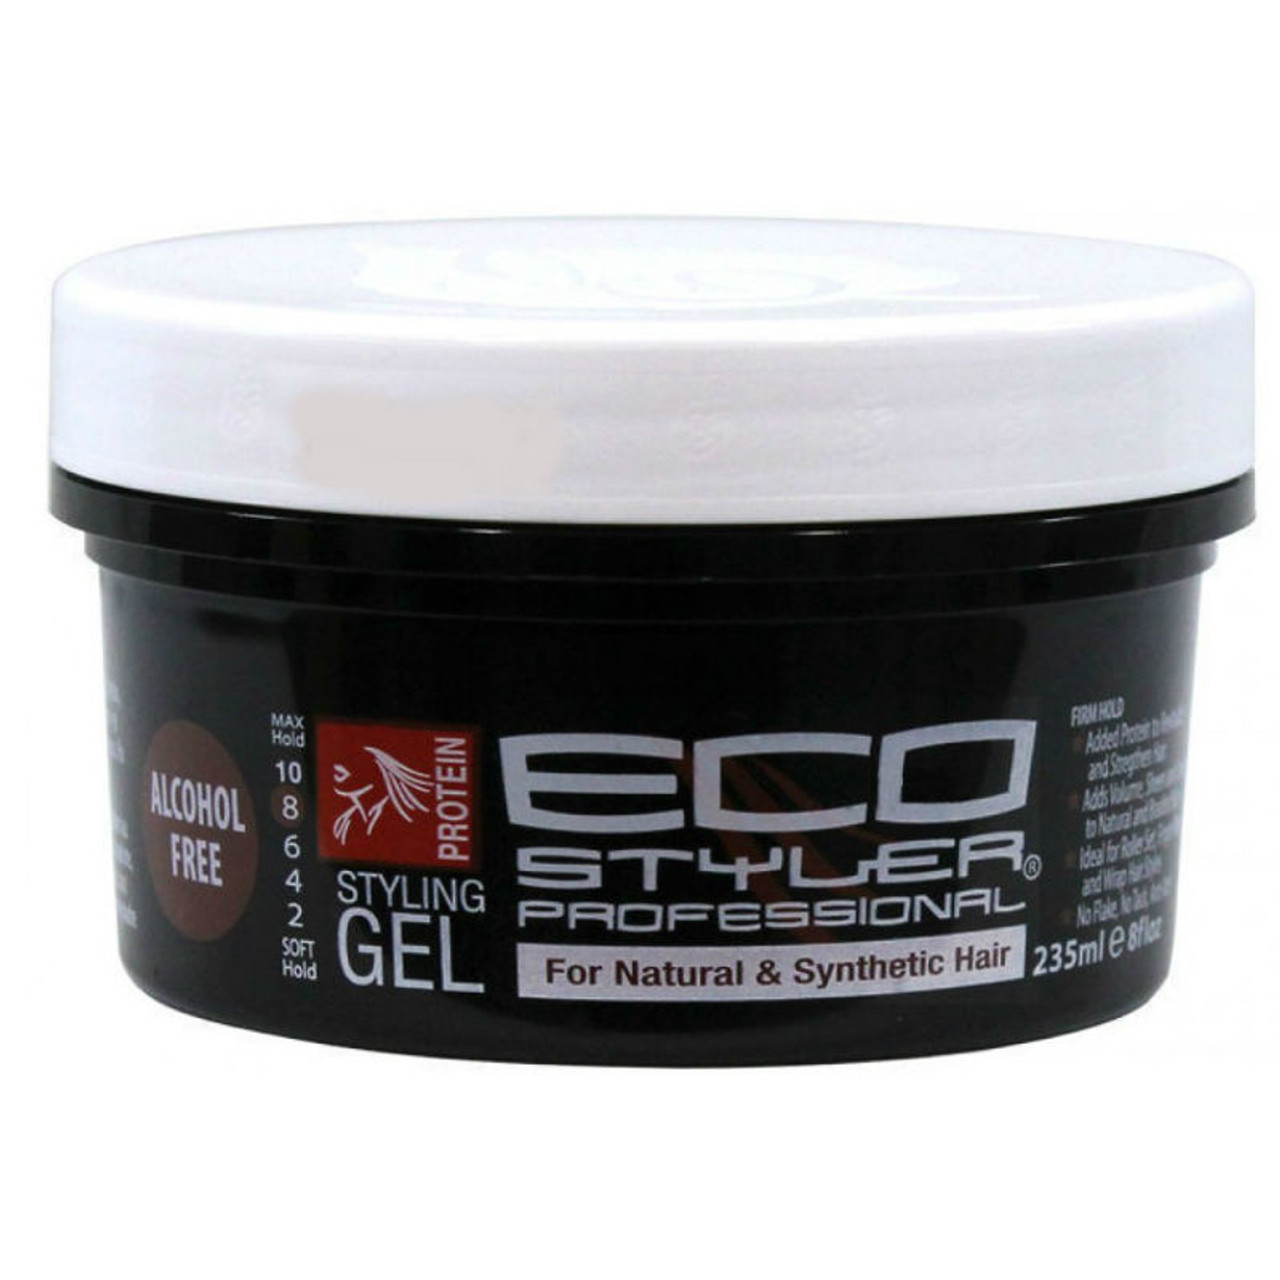 8oz Softee Extra Hold Protein Styling Gel — Softee Products